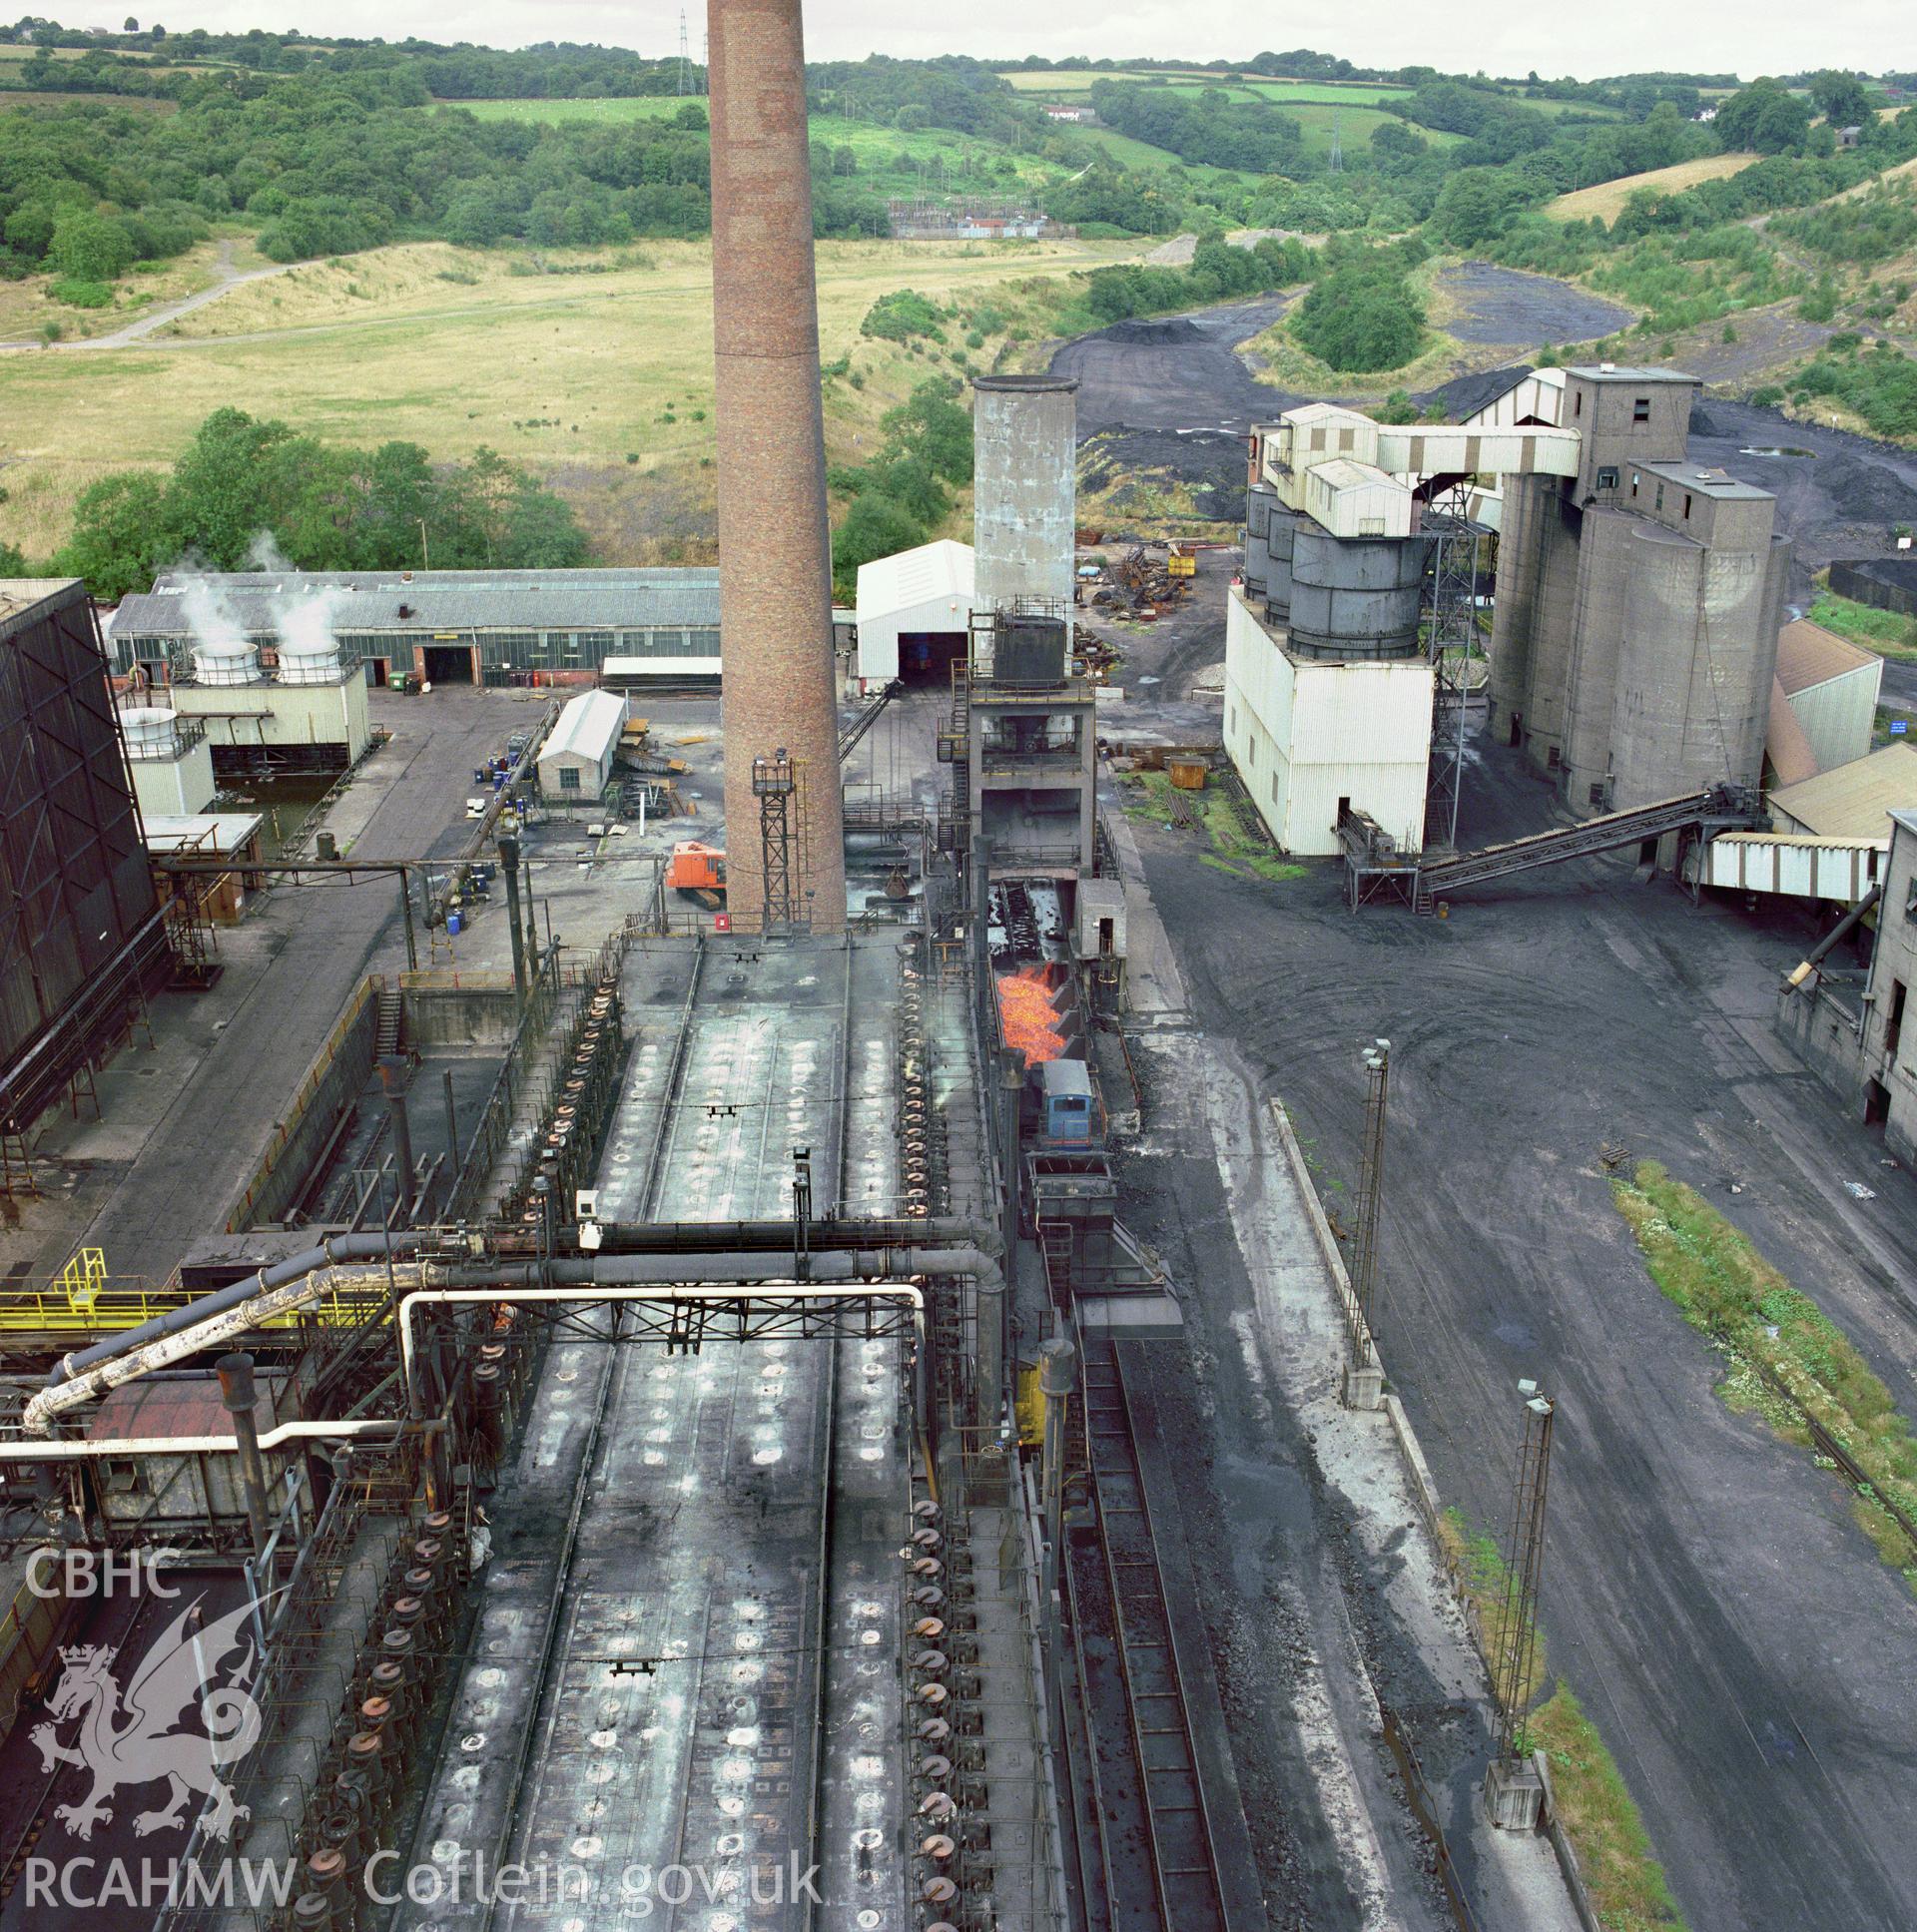 Colour transparency showing  view of Cwm Coking Works, Llantwit Fardre, produced by Fleur James, 2005.